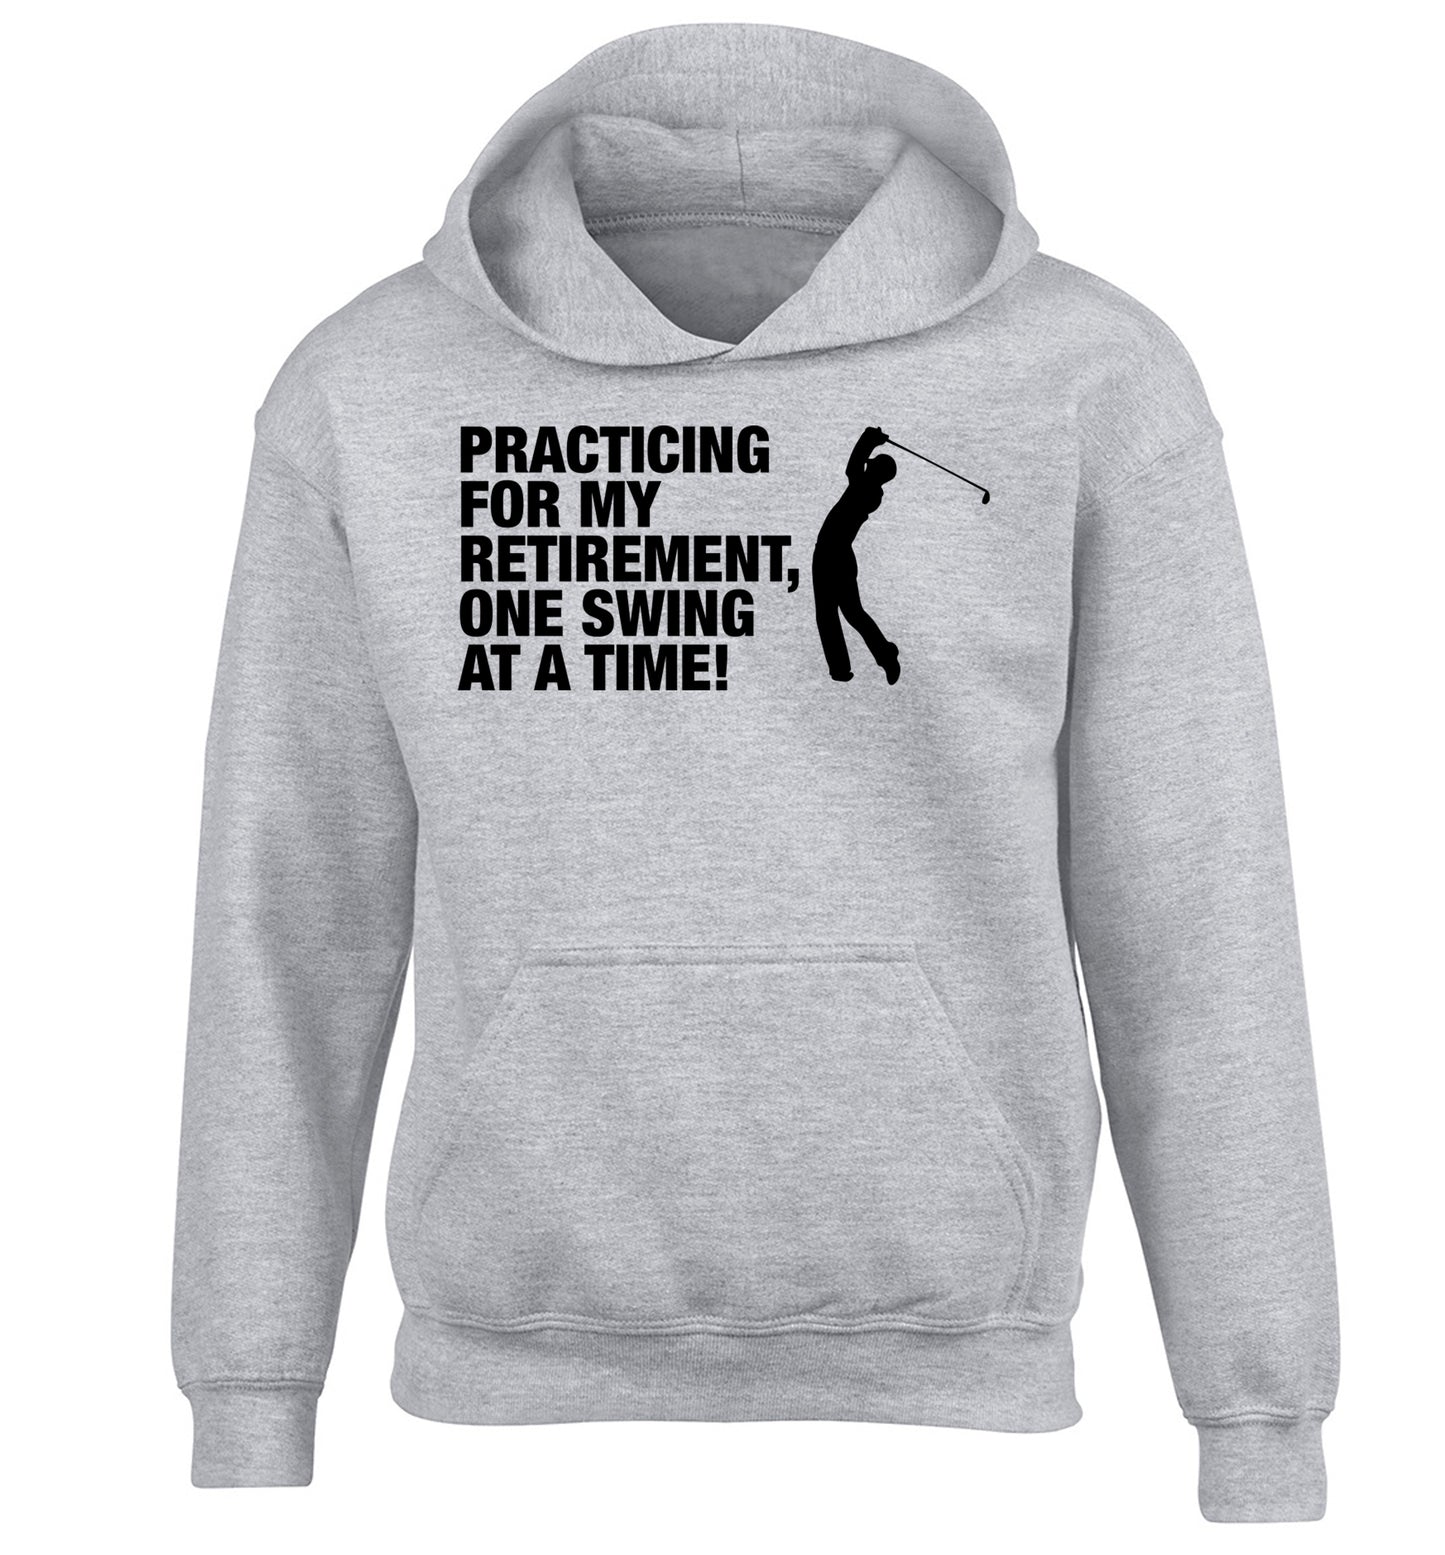 Practicing for my retirement one swing at a time children's grey hoodie 12-13 Years